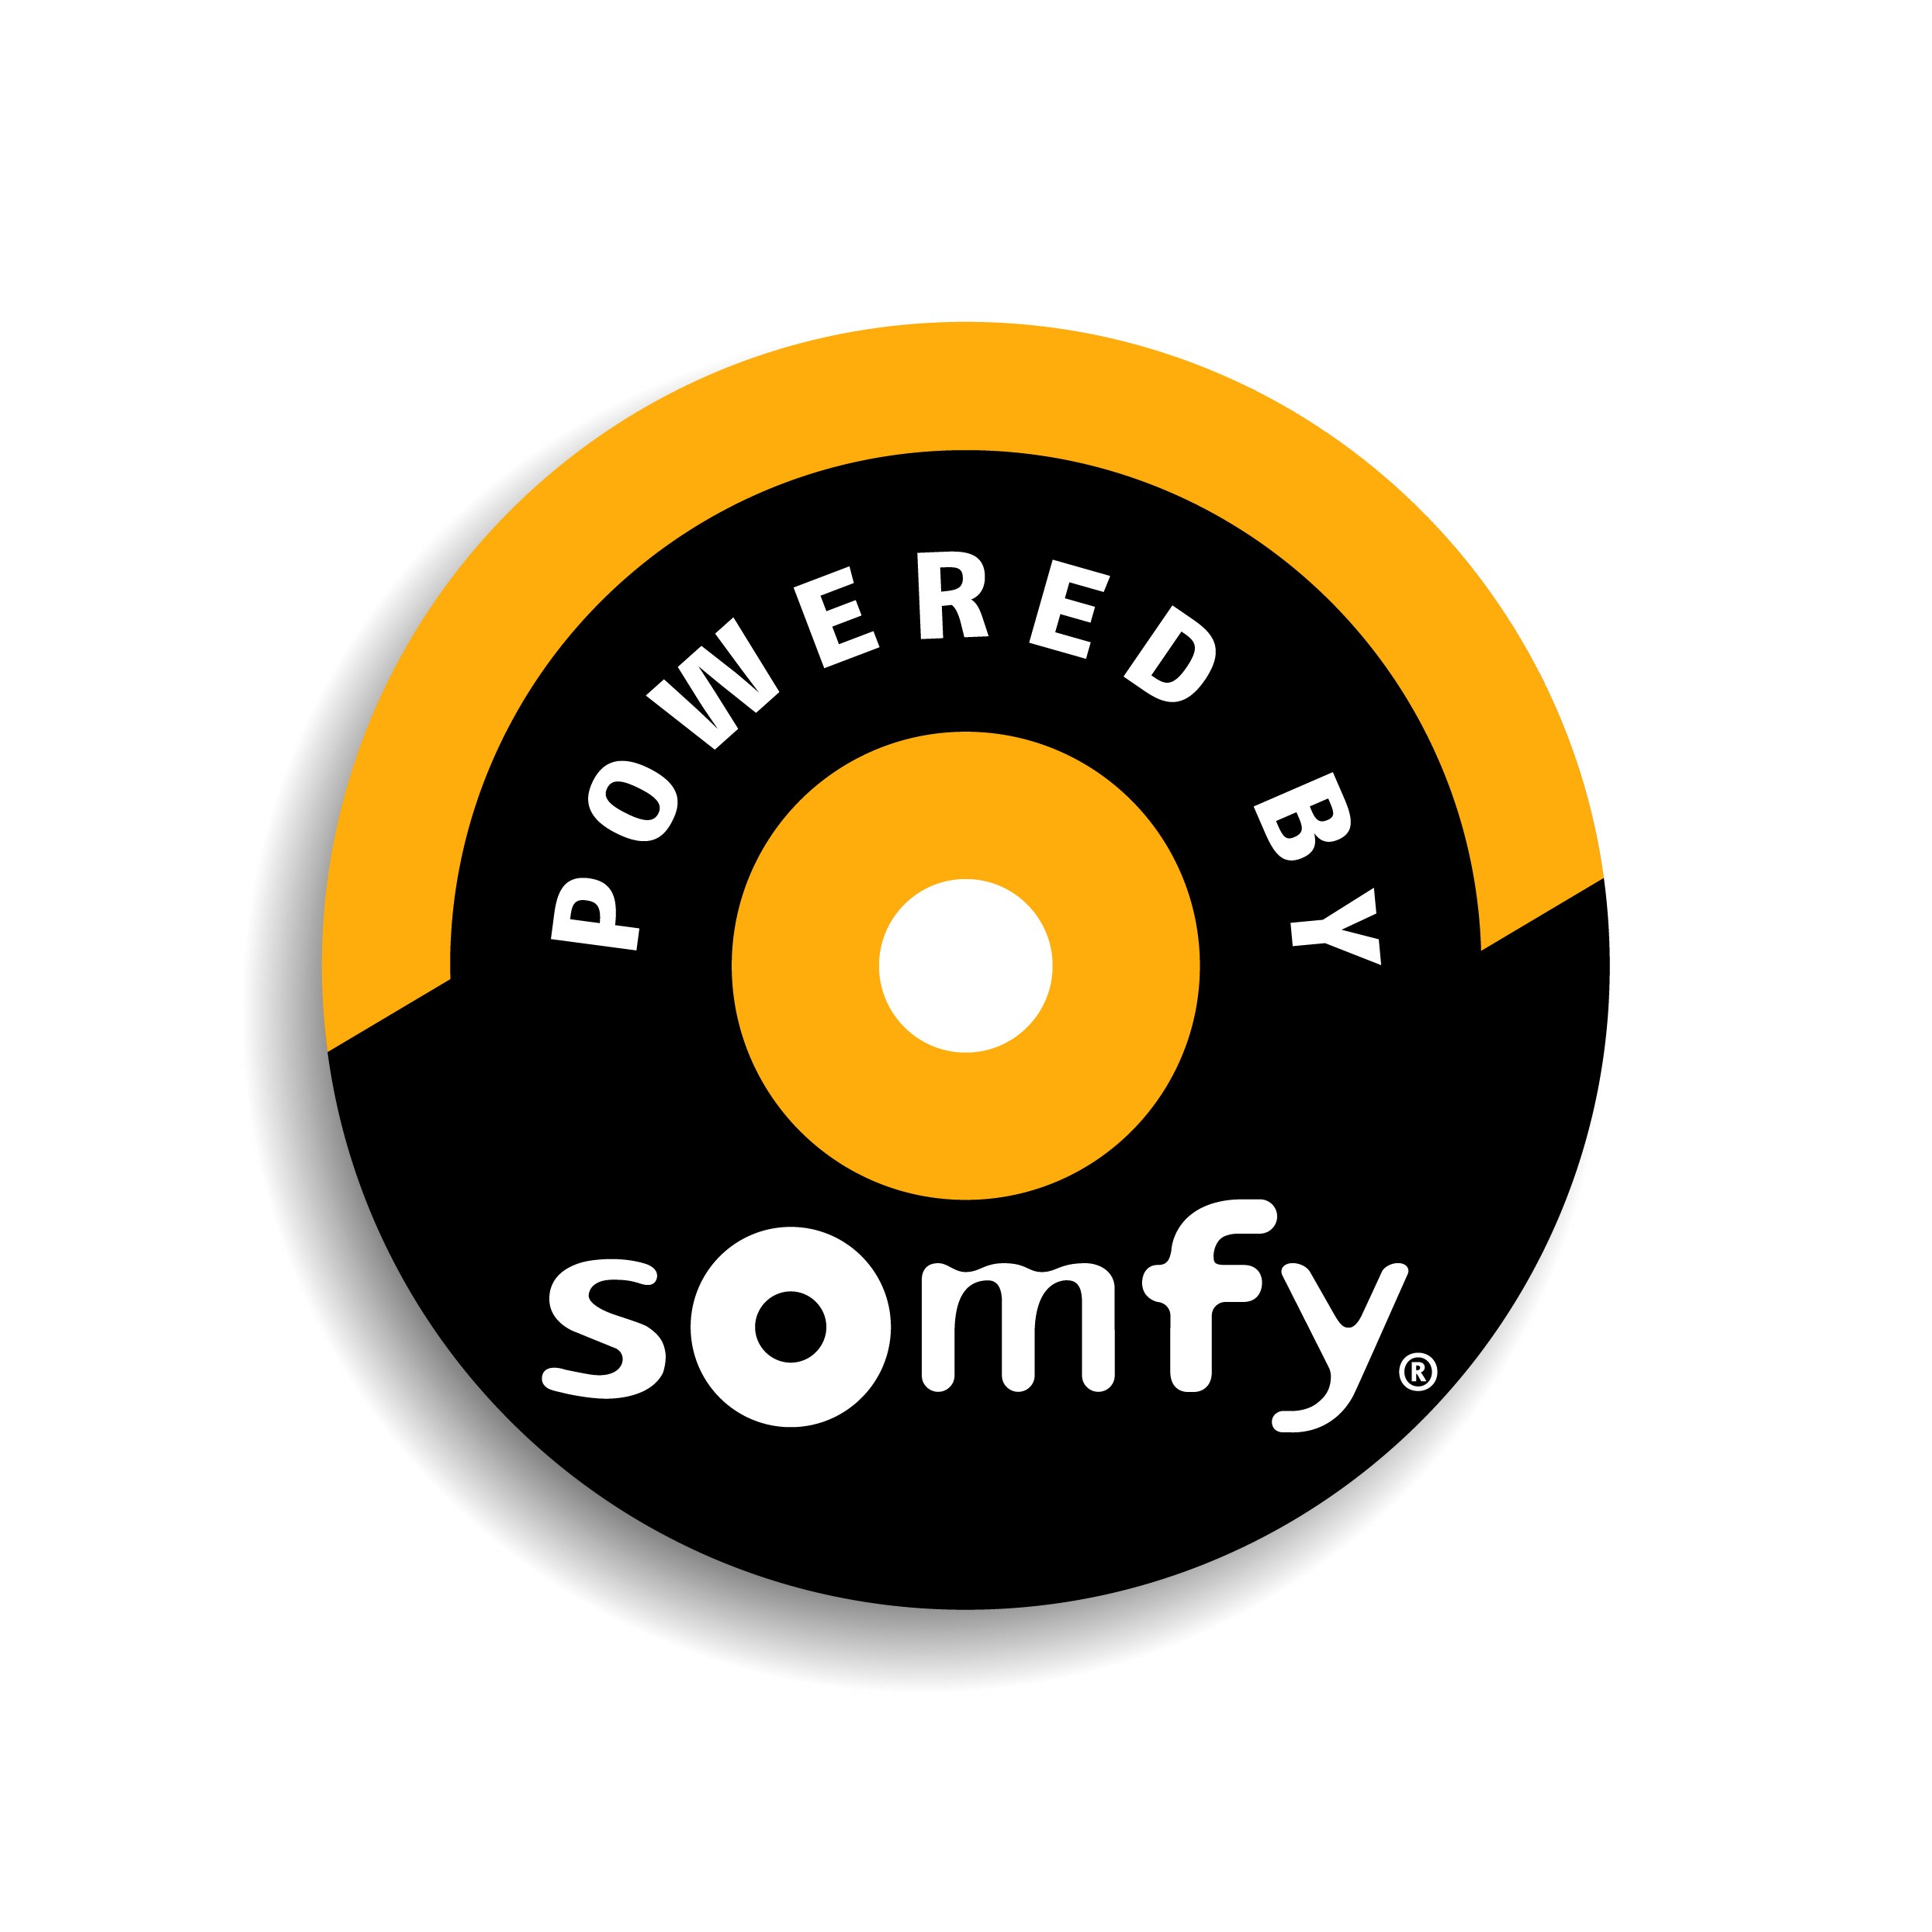 POWERED BY SOMFY: PARAS TAKUUSI!